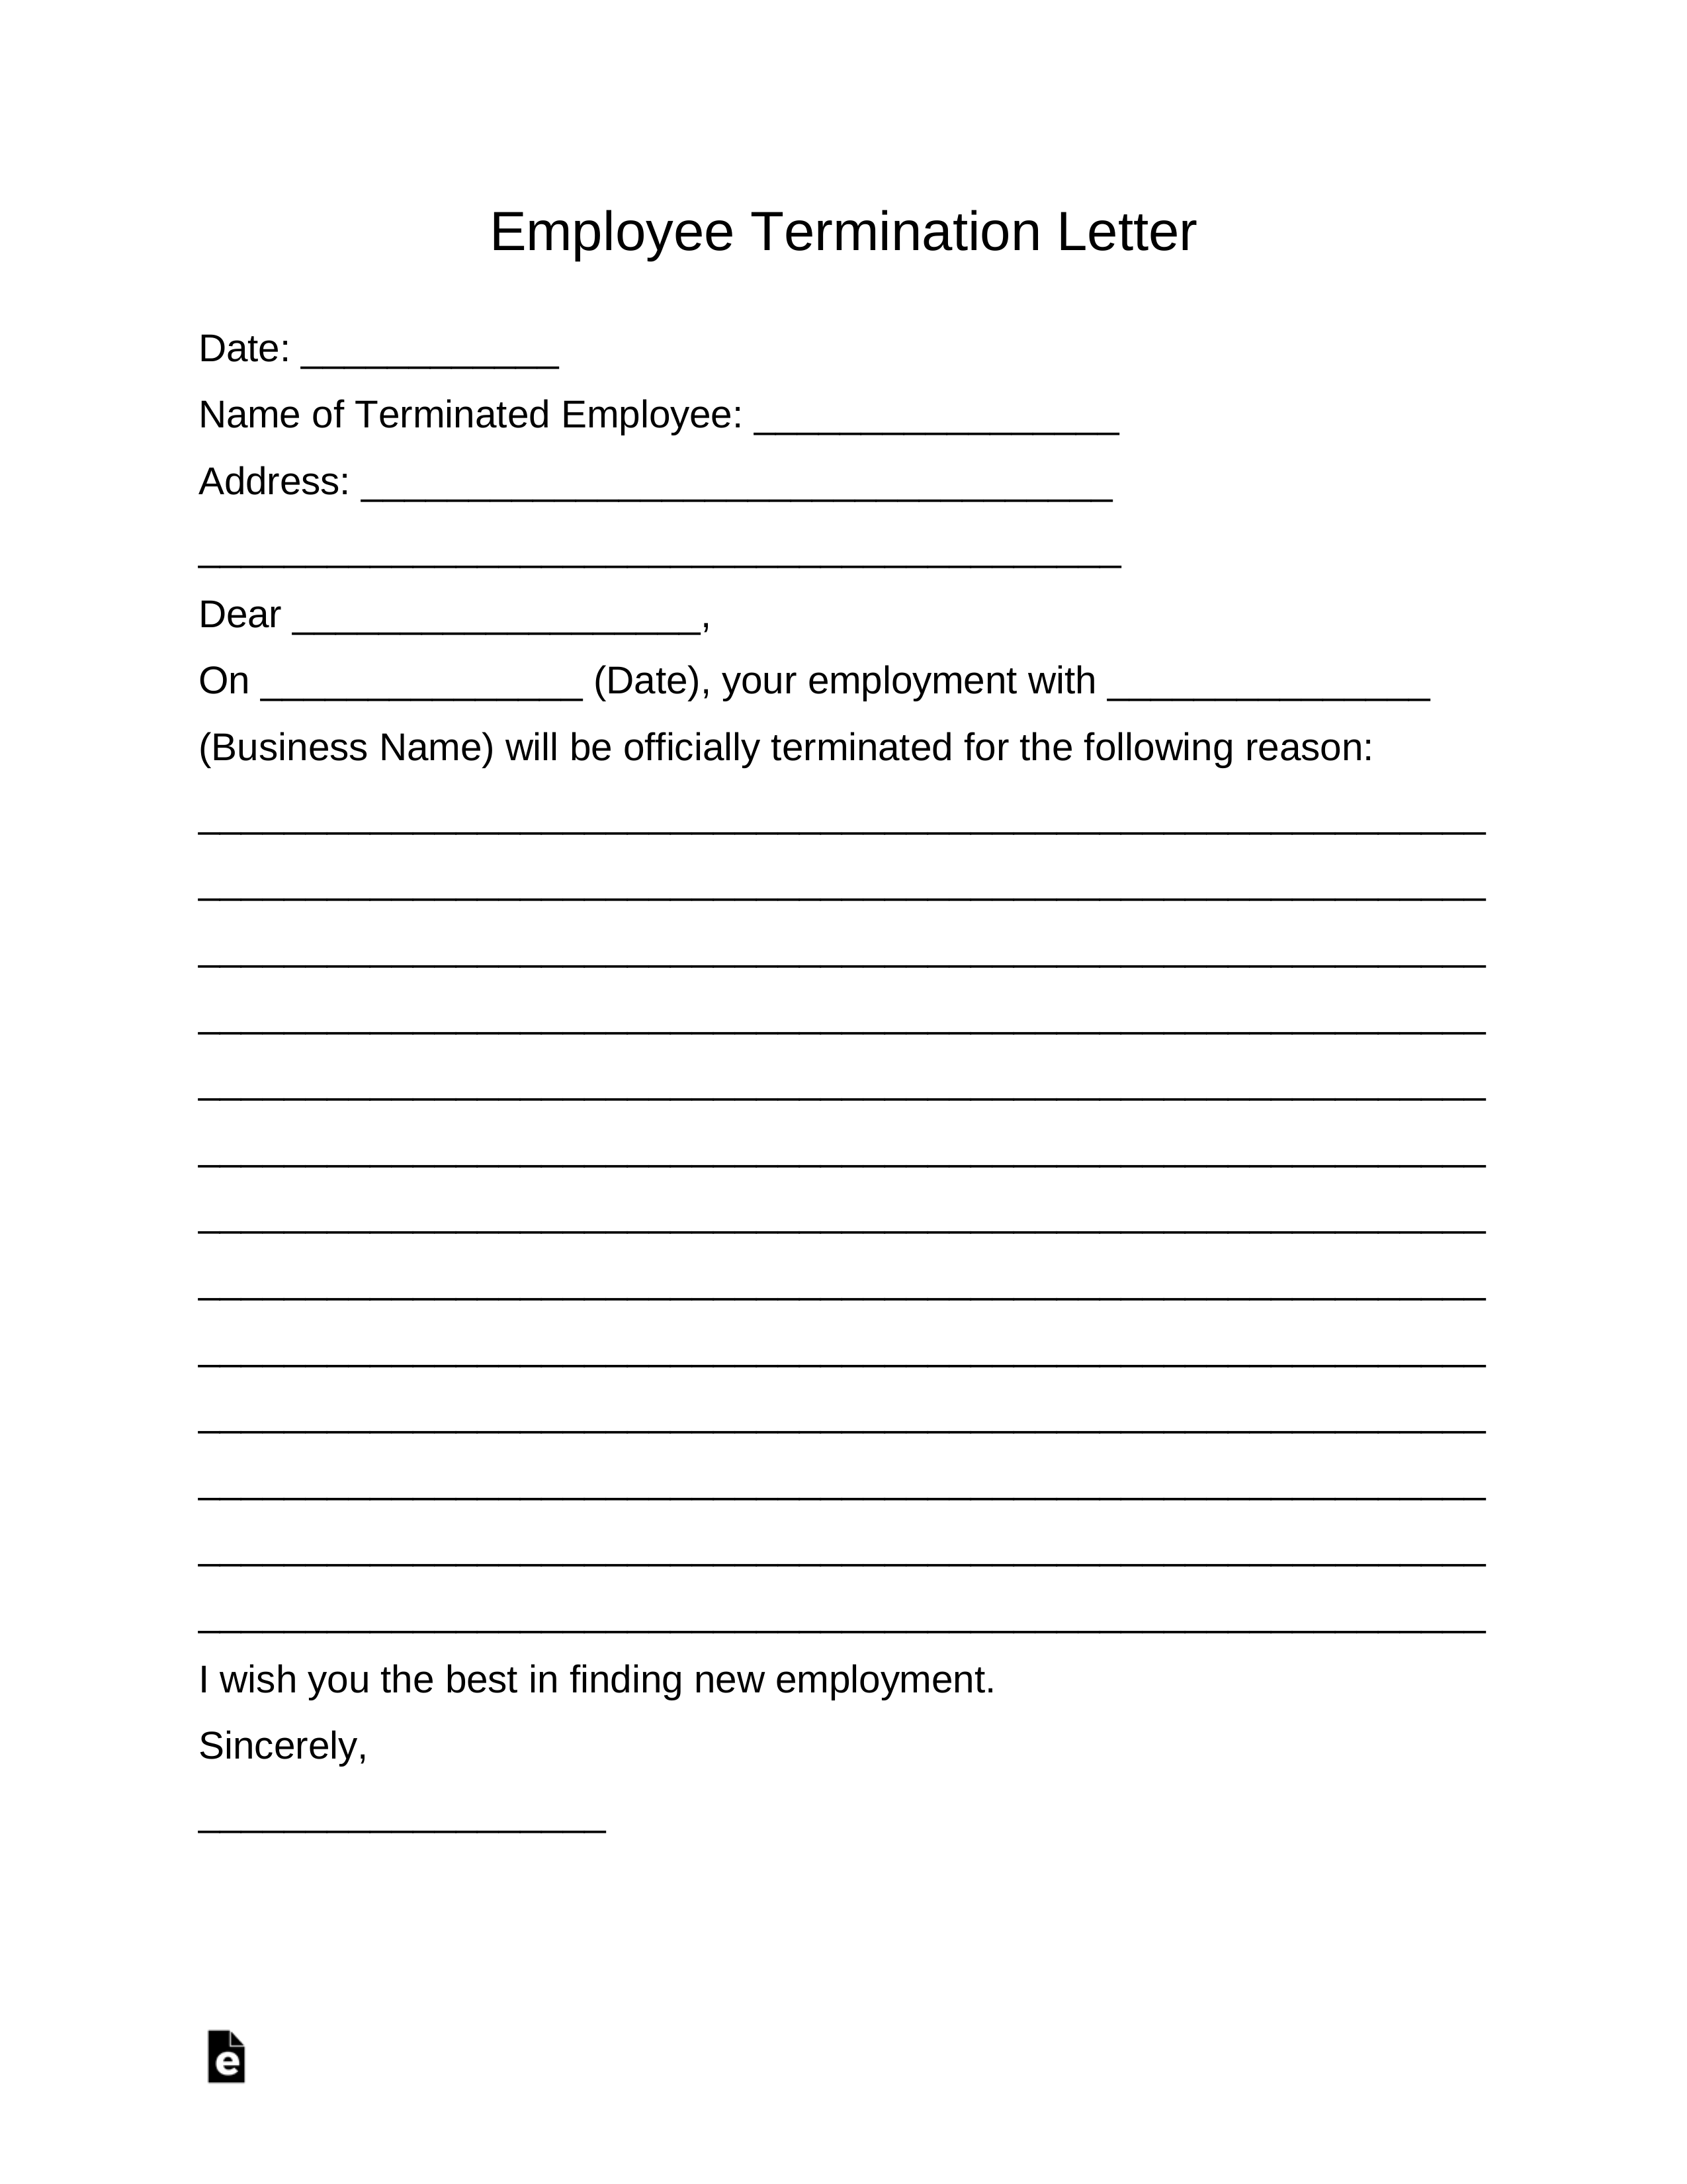 Employee Separation Letter Template from eforms.com